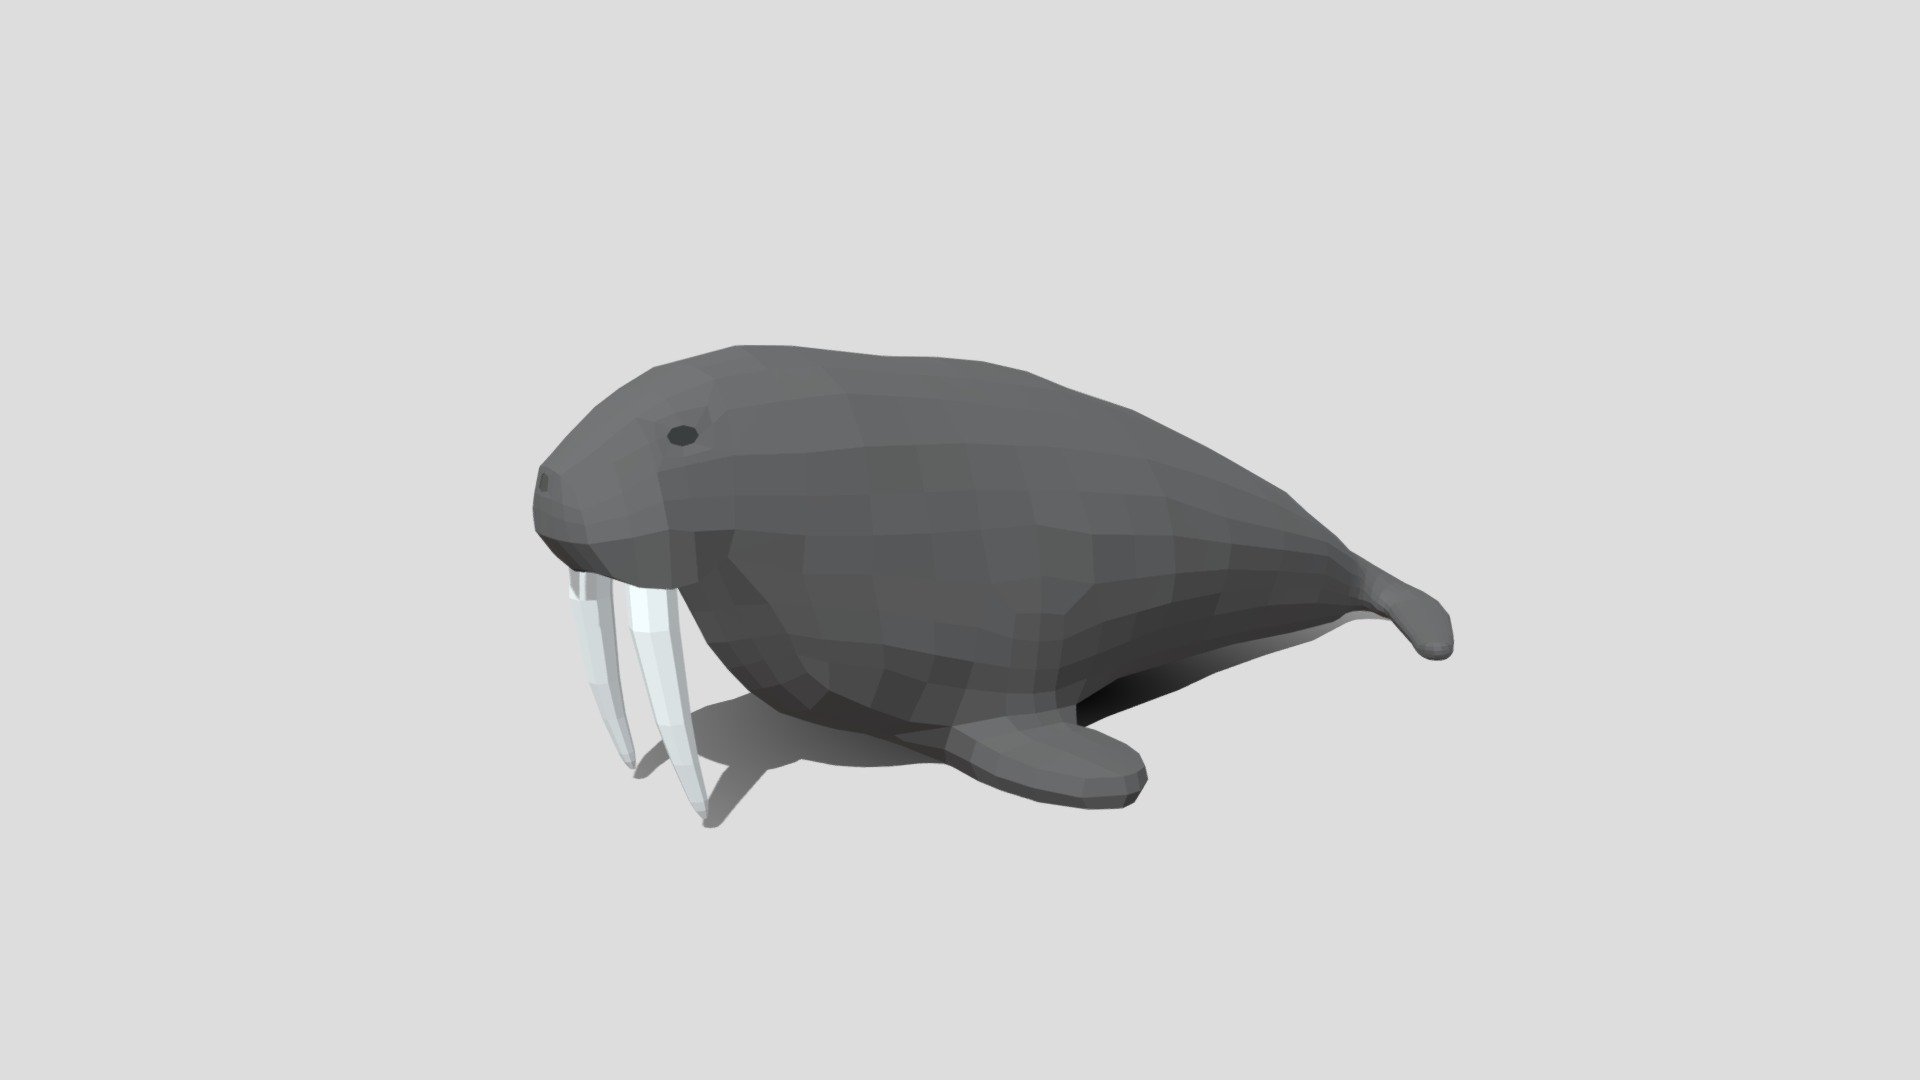 This is a low poly 3D model of a Walrus. The low poly Walrus was modeled and prepared for low-poly style renderings, background, general CG visualization presented as a mesh with quads only.

Verts : 1.290 Faces: 1.288

The 3D model have simple materials with diffuse colors.

No ring, maps and no UVW mapping is available.

The original file was created in blender. You will receive a 3DS, OBJ, FBX, blend, DAE, Stl.

All preview images were rendered with Blender Cycles. Product is ready to render out-of-the-box. Please note that the lights, cameras, and background is only included in the .blend file. The model is clean and alone in the other provided files, centred at origin and has real-world scale 3d model